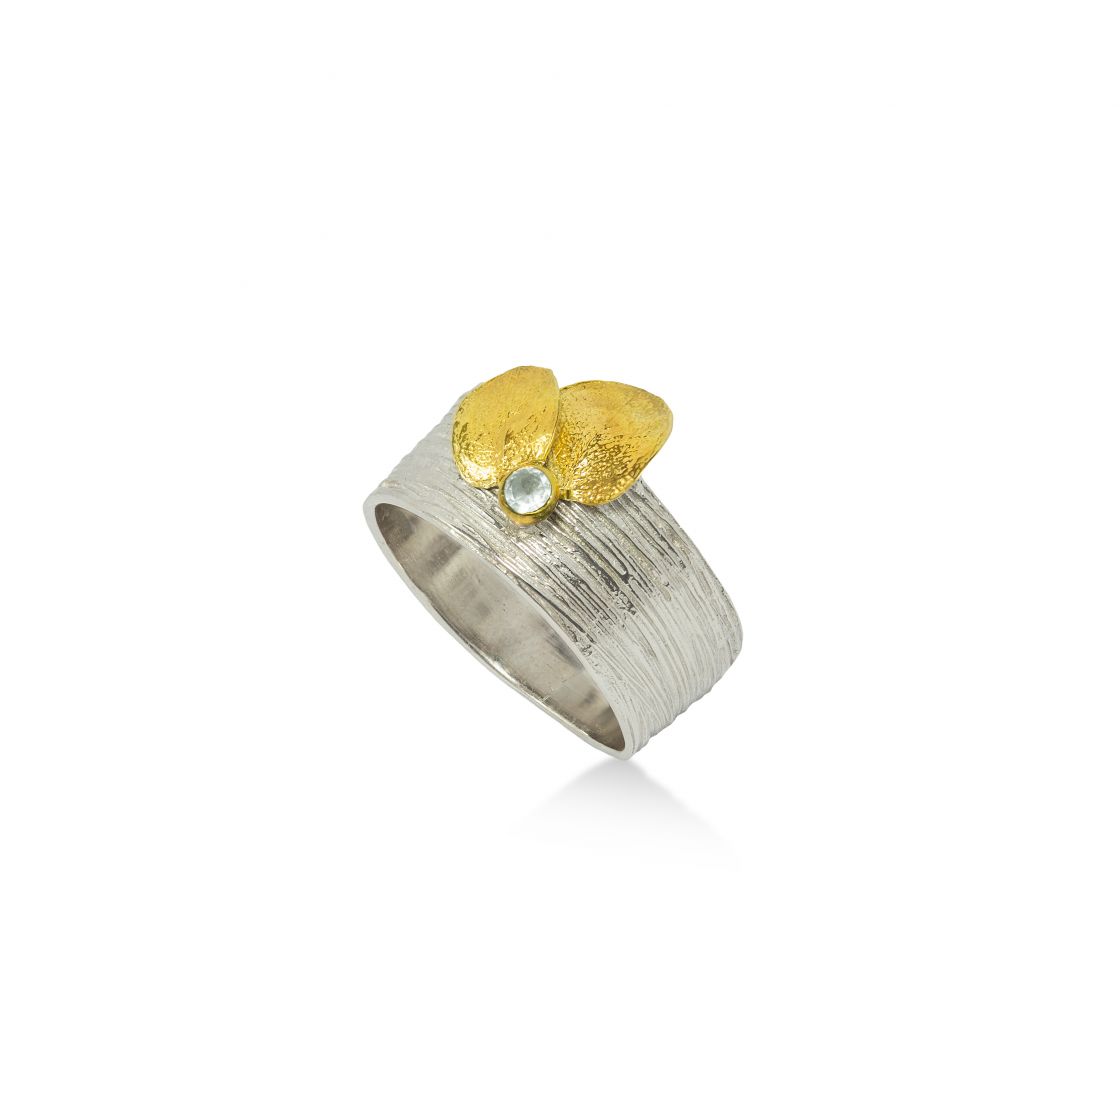 Wide silver ring with line-hammered finish, set with two gold leaves.